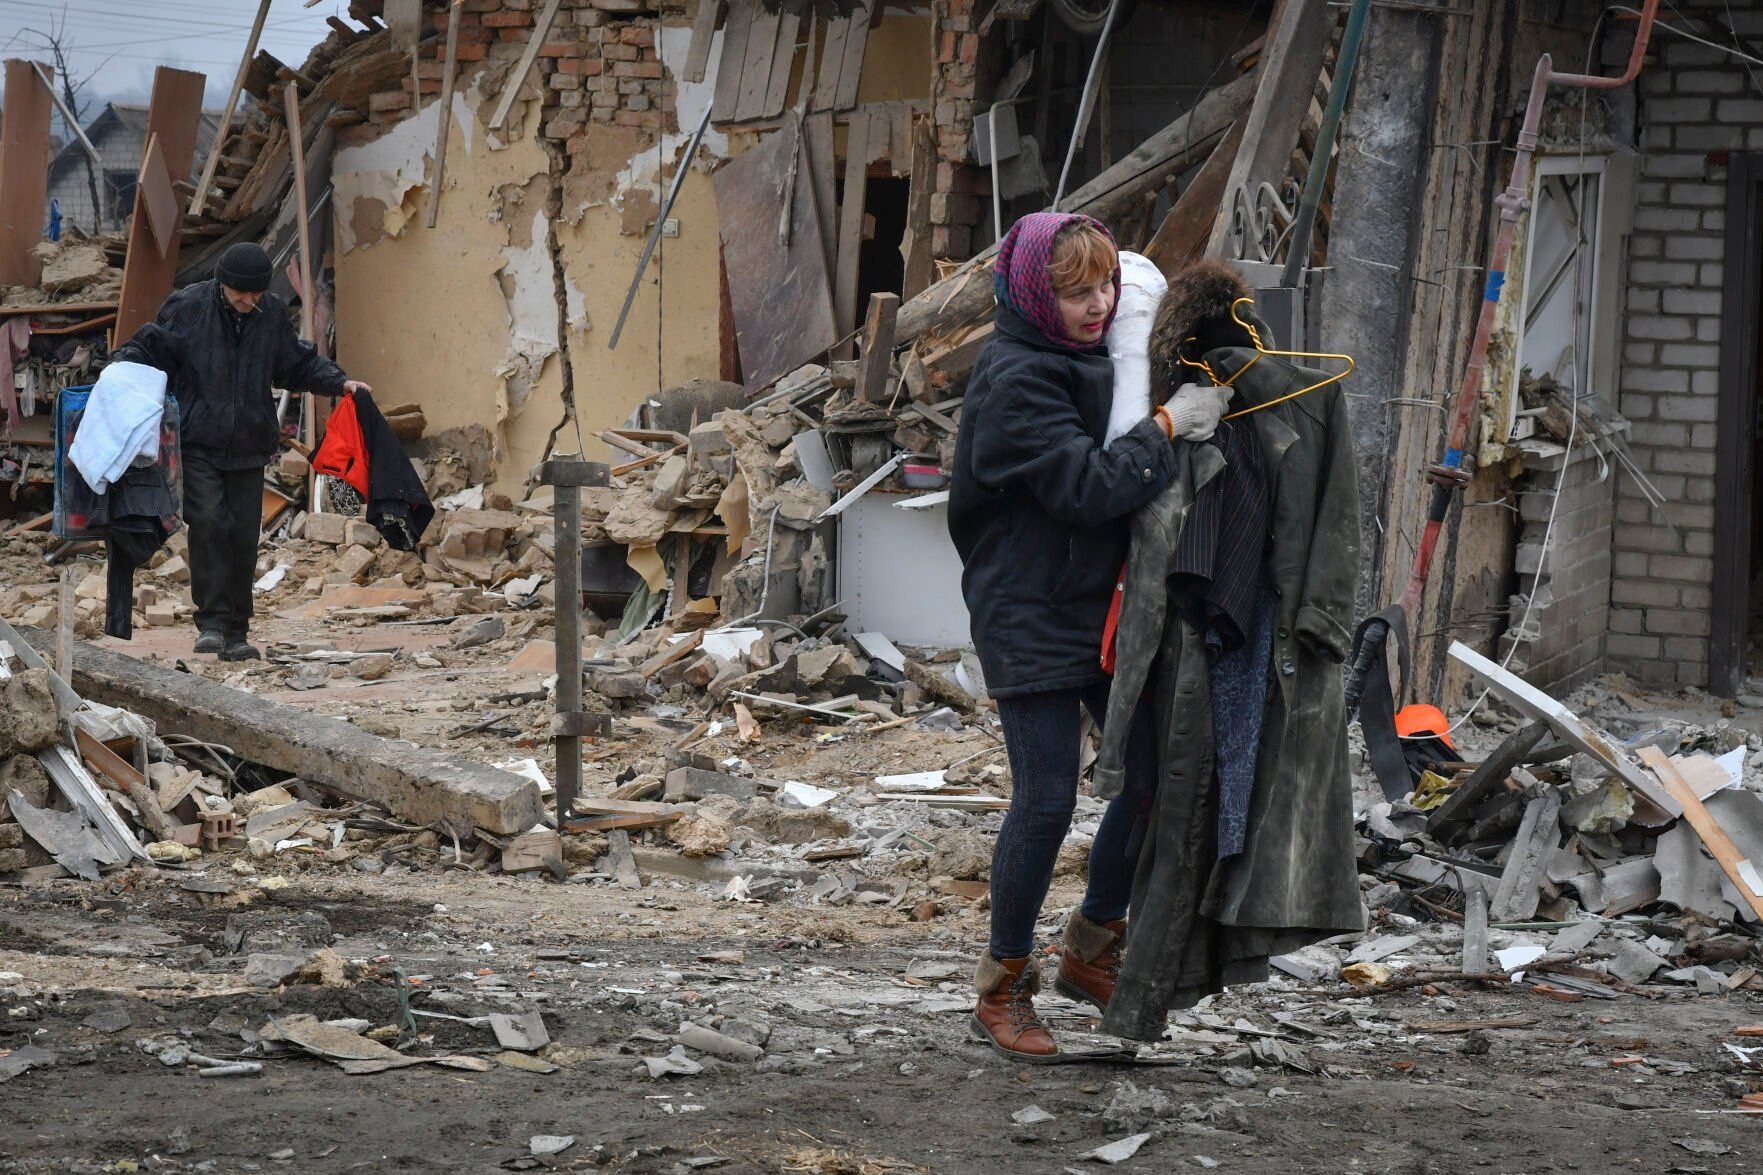 <p>Local residents carry their belongings as they leave their home ruined in the Saturday Russian rocket attack in Zaporizhzhya, Ukraine, Sunday, Jan. 1, 2023. (AP Photo/Andriy Andriyenko)</p>   PHOTO CREDIT: Andriy Andriyenko 